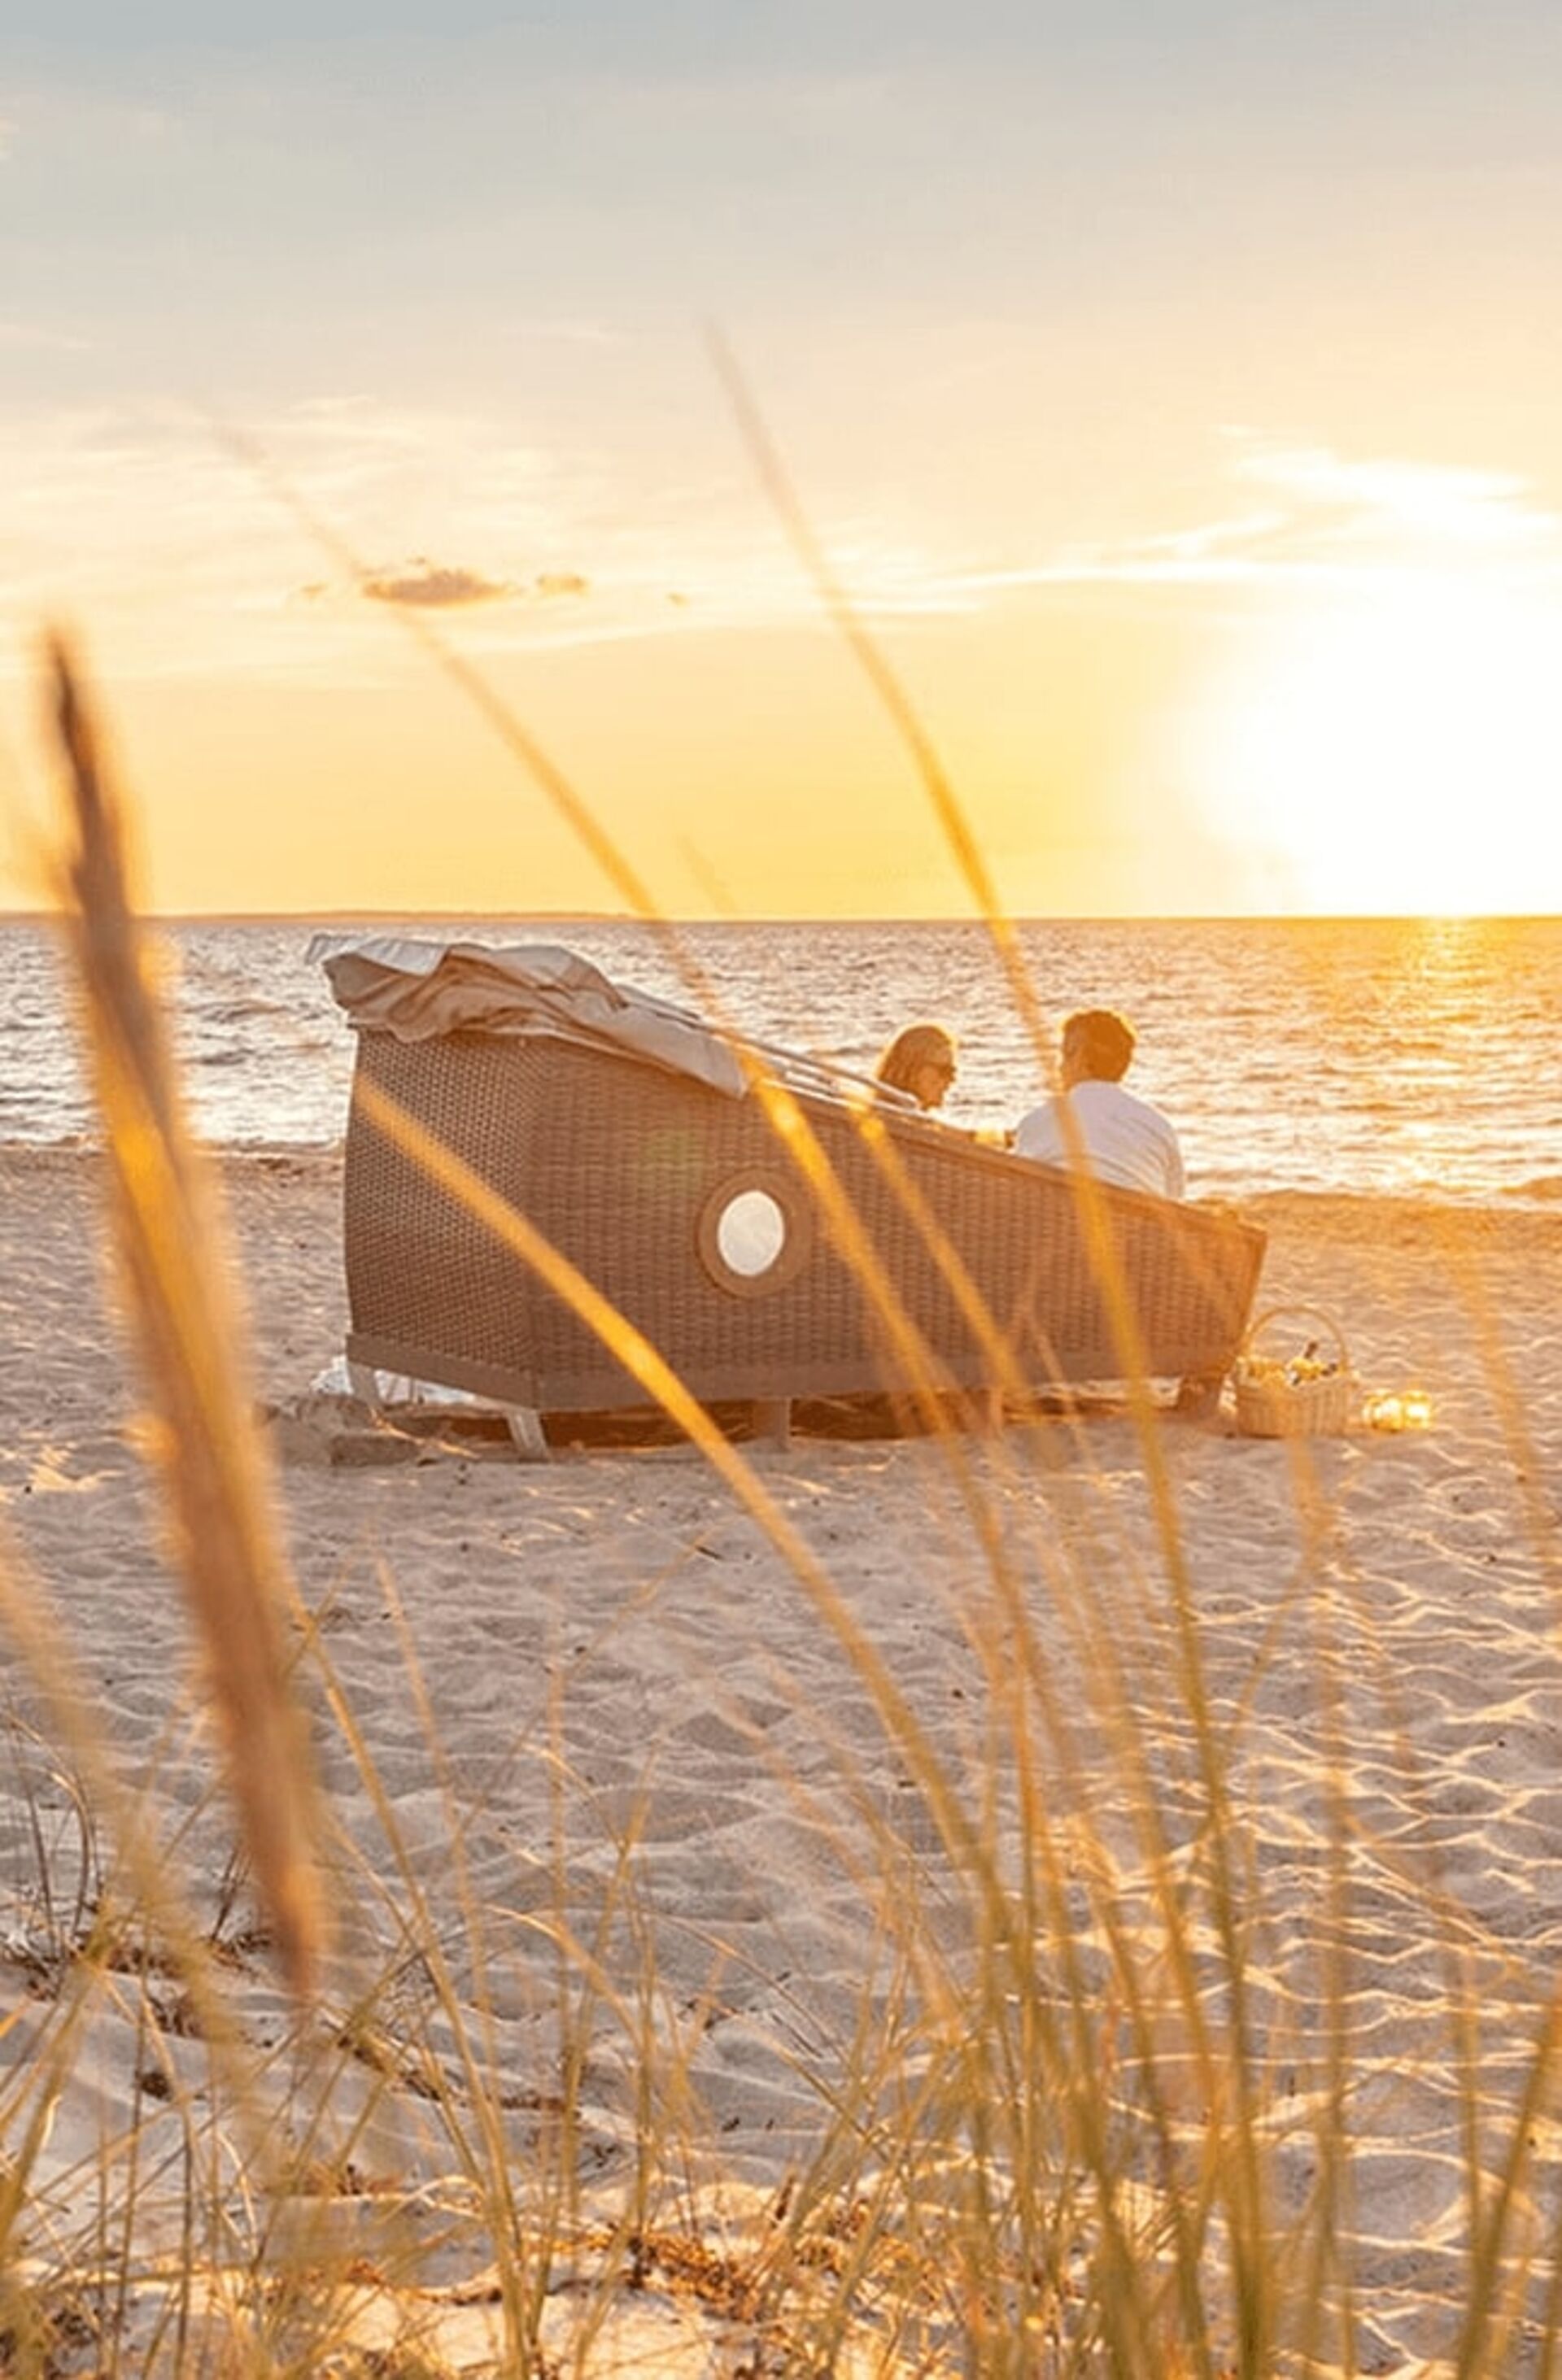 Spend the night in a wicker beach bed on the Baltic Sea